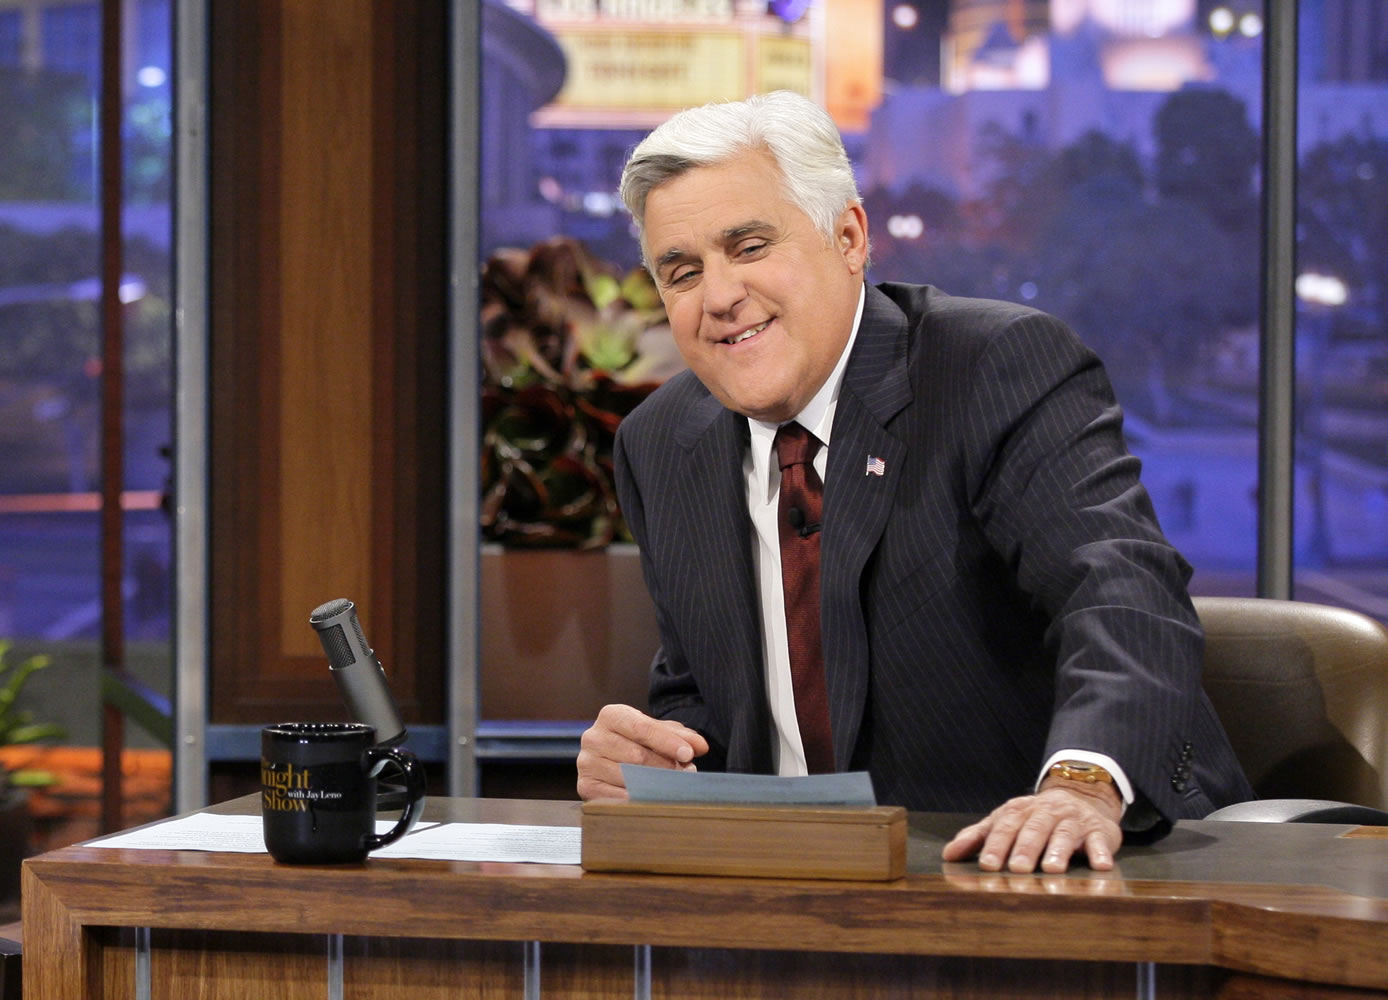 Jay Leno, host of &quot;The Tonight Show with Jay Leno,&quot; on the set in Burbank, Calif.